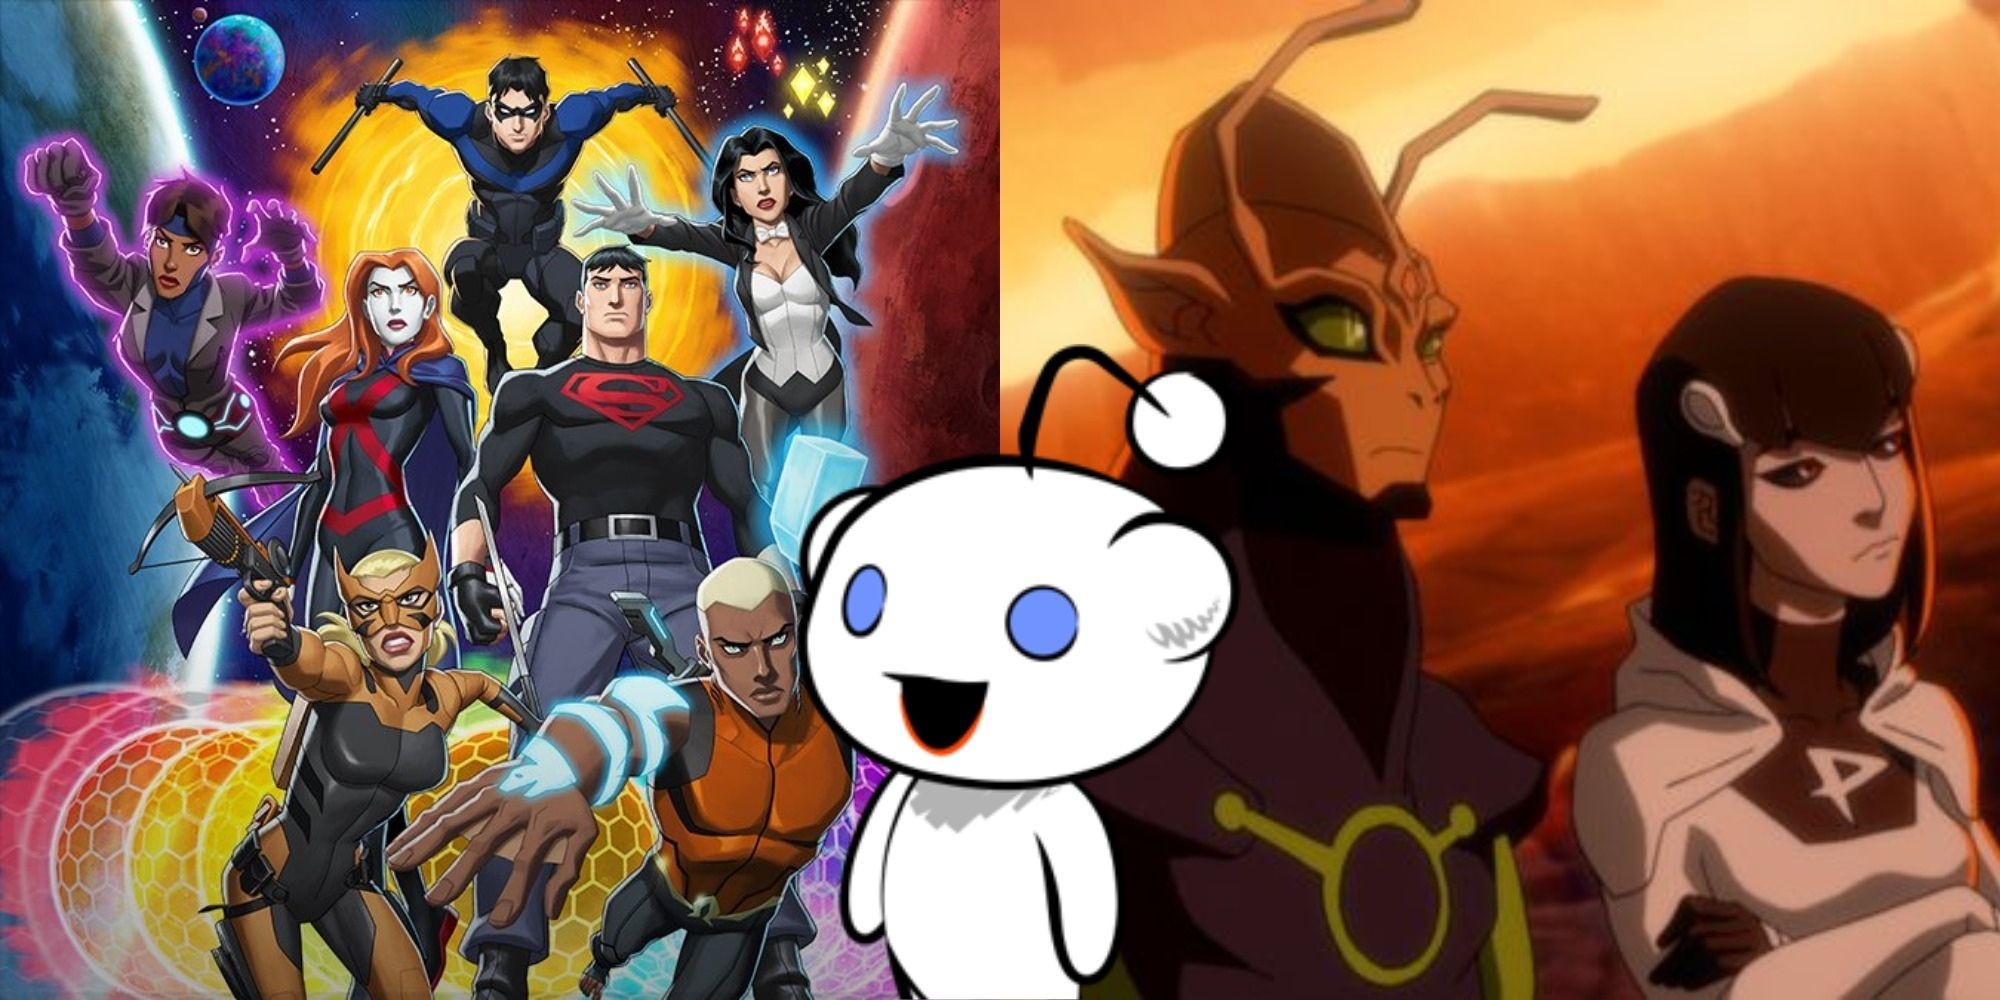 9 Questions Fans Already Have About Young Justice Phantoms According To Reddit